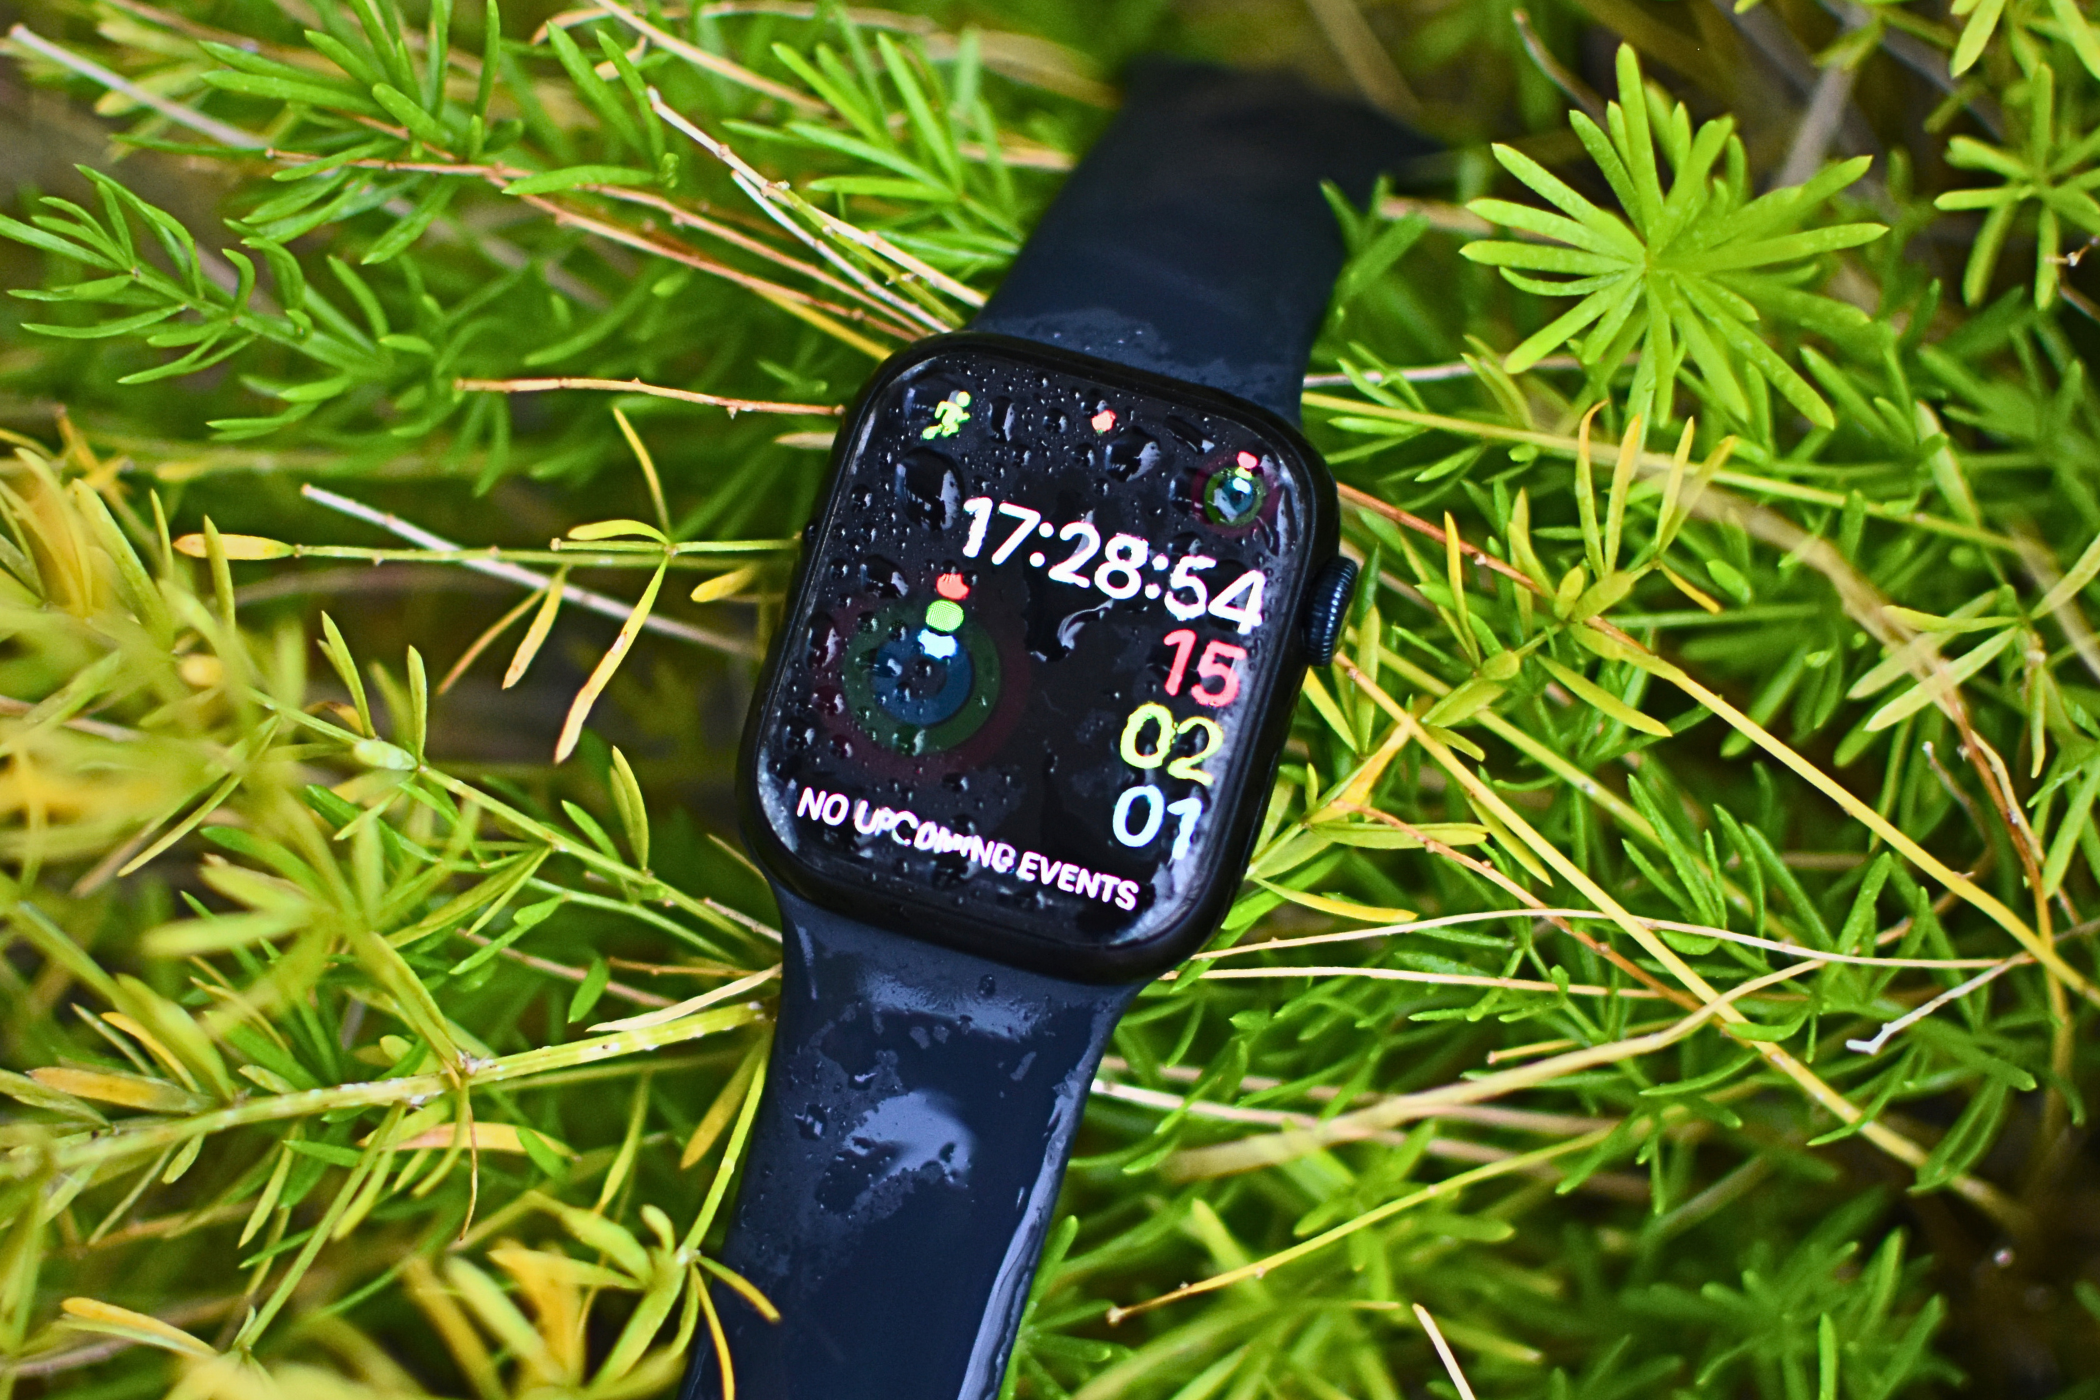 Apple Watch Series 8 on a leafy plant with water droplets on the screen.